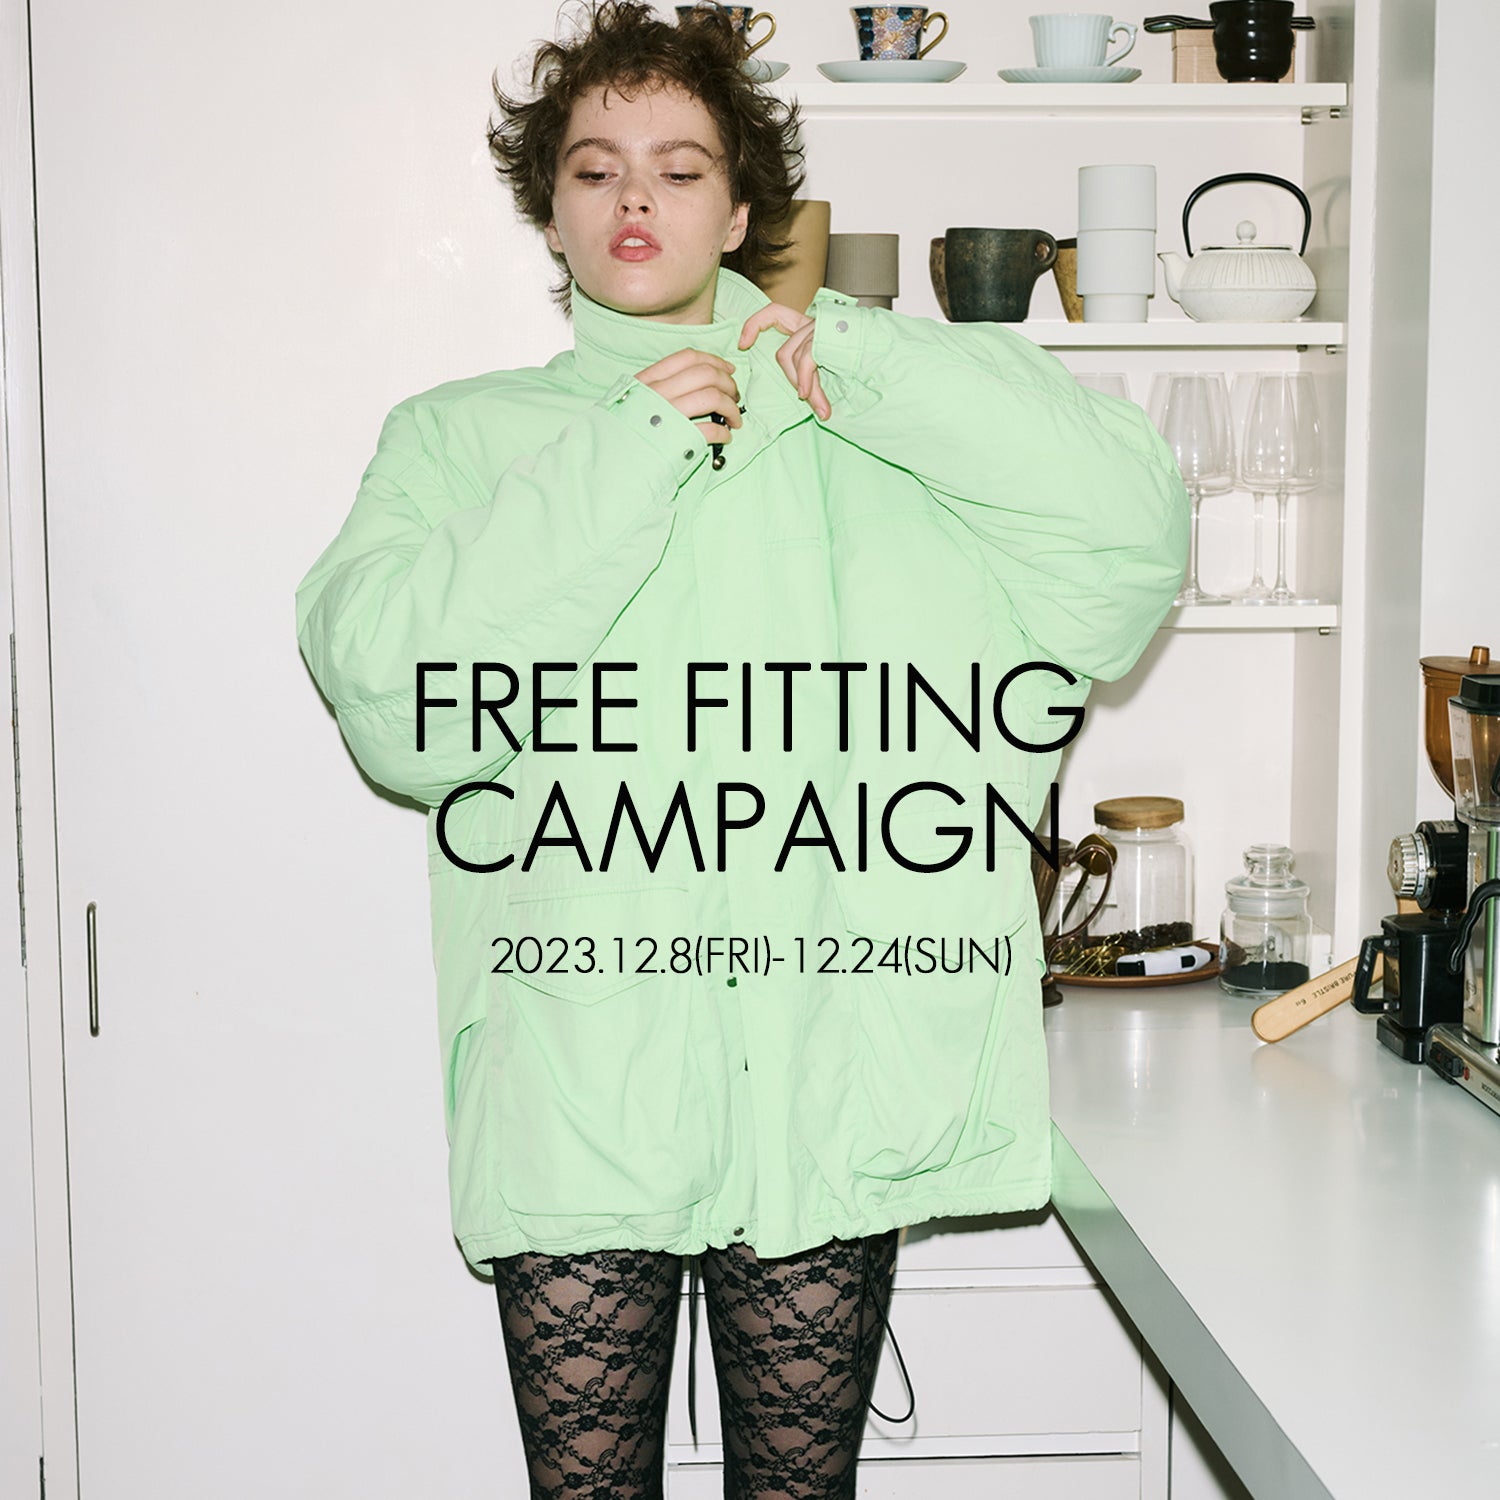 FREE FITTING CAMPAIGN】 ご自宅でご試着、返品送料無料キャンペーン開催。